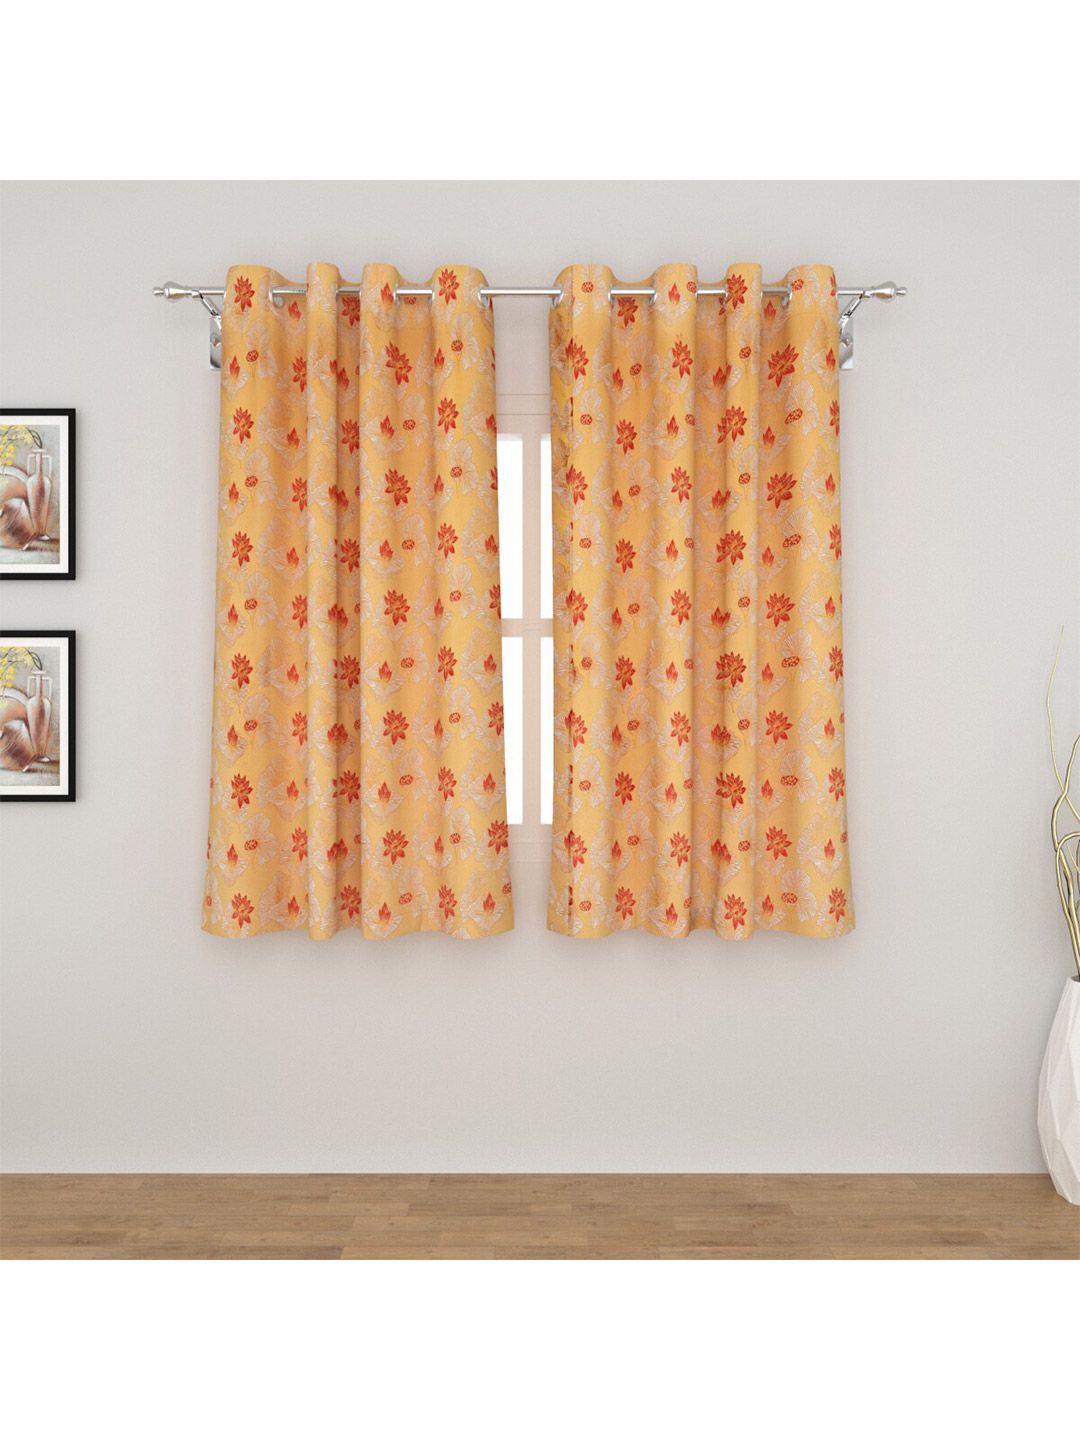 Home CentreSet of 2 Peach-Coloured & Orange Floral Black Out Window Curtain Price in India